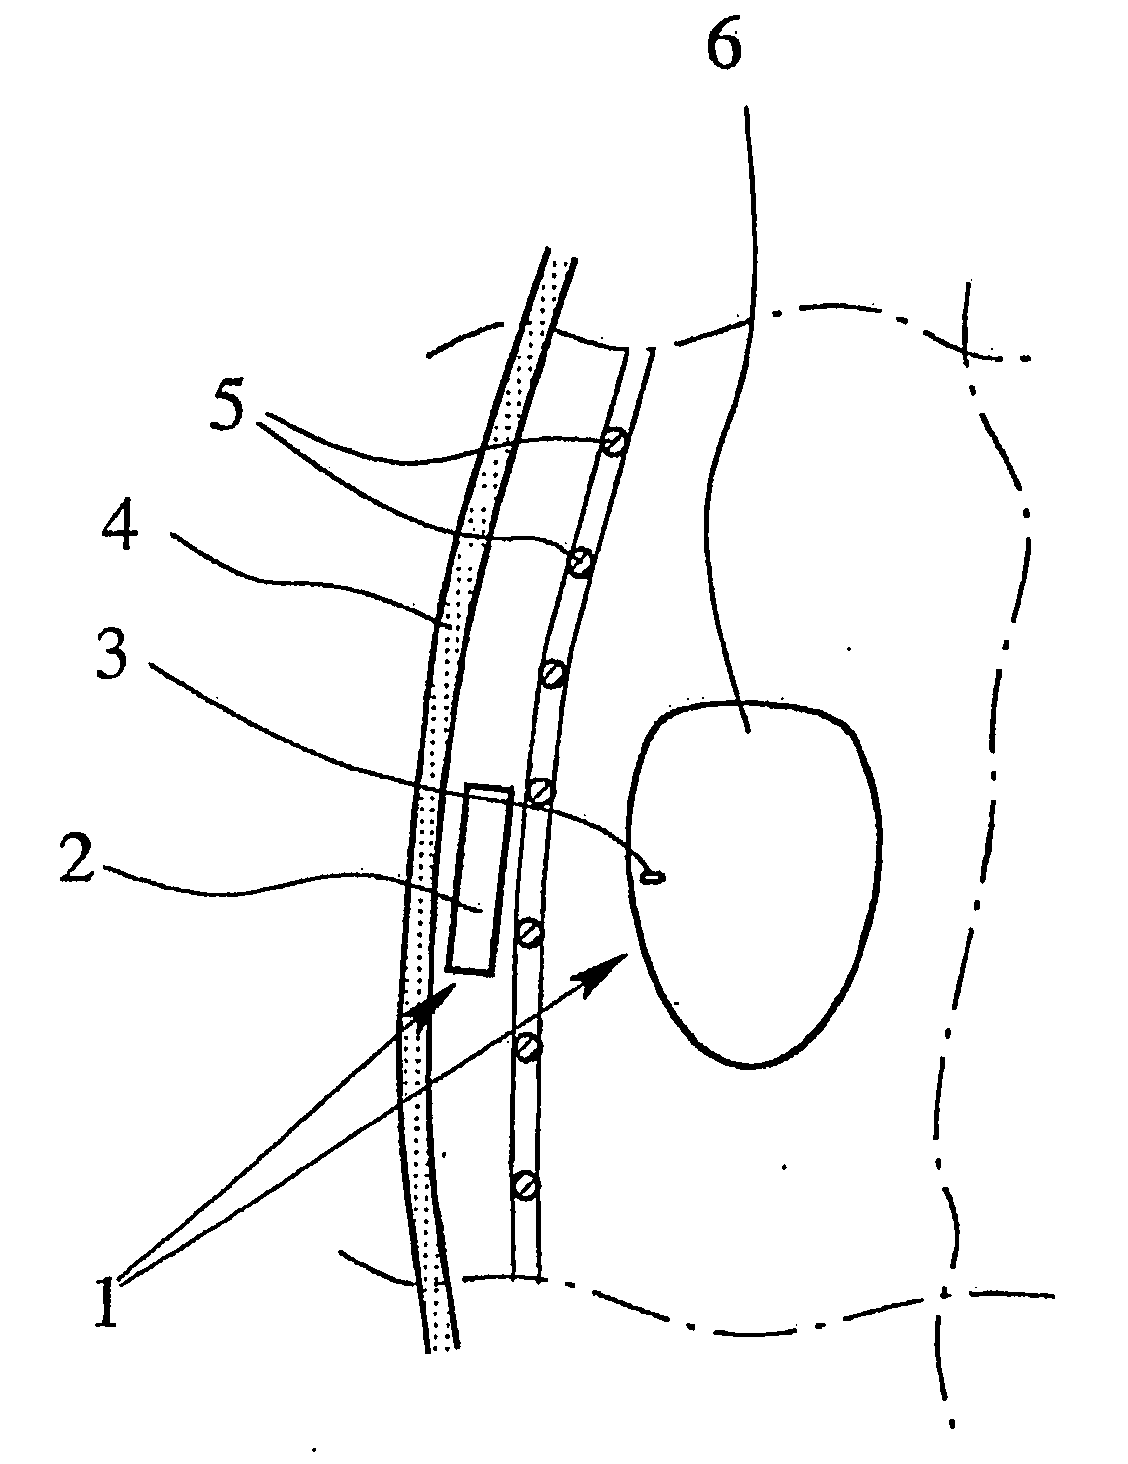 Stimulation system, in particular a cardiac pacemaker